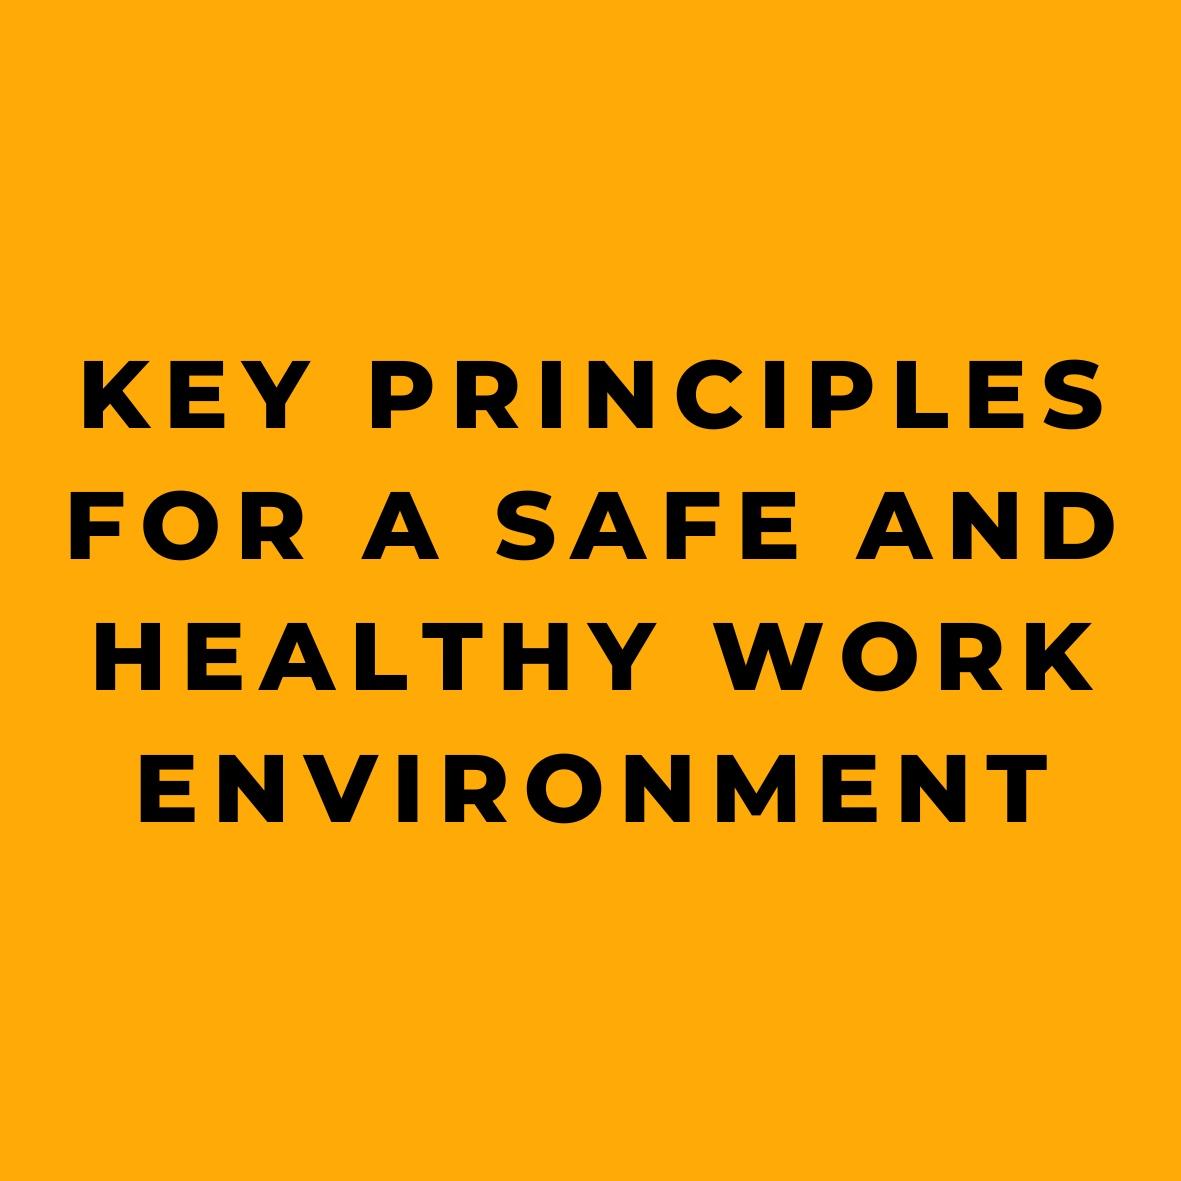 Key Principles for a Safe and Healthy Work Environment